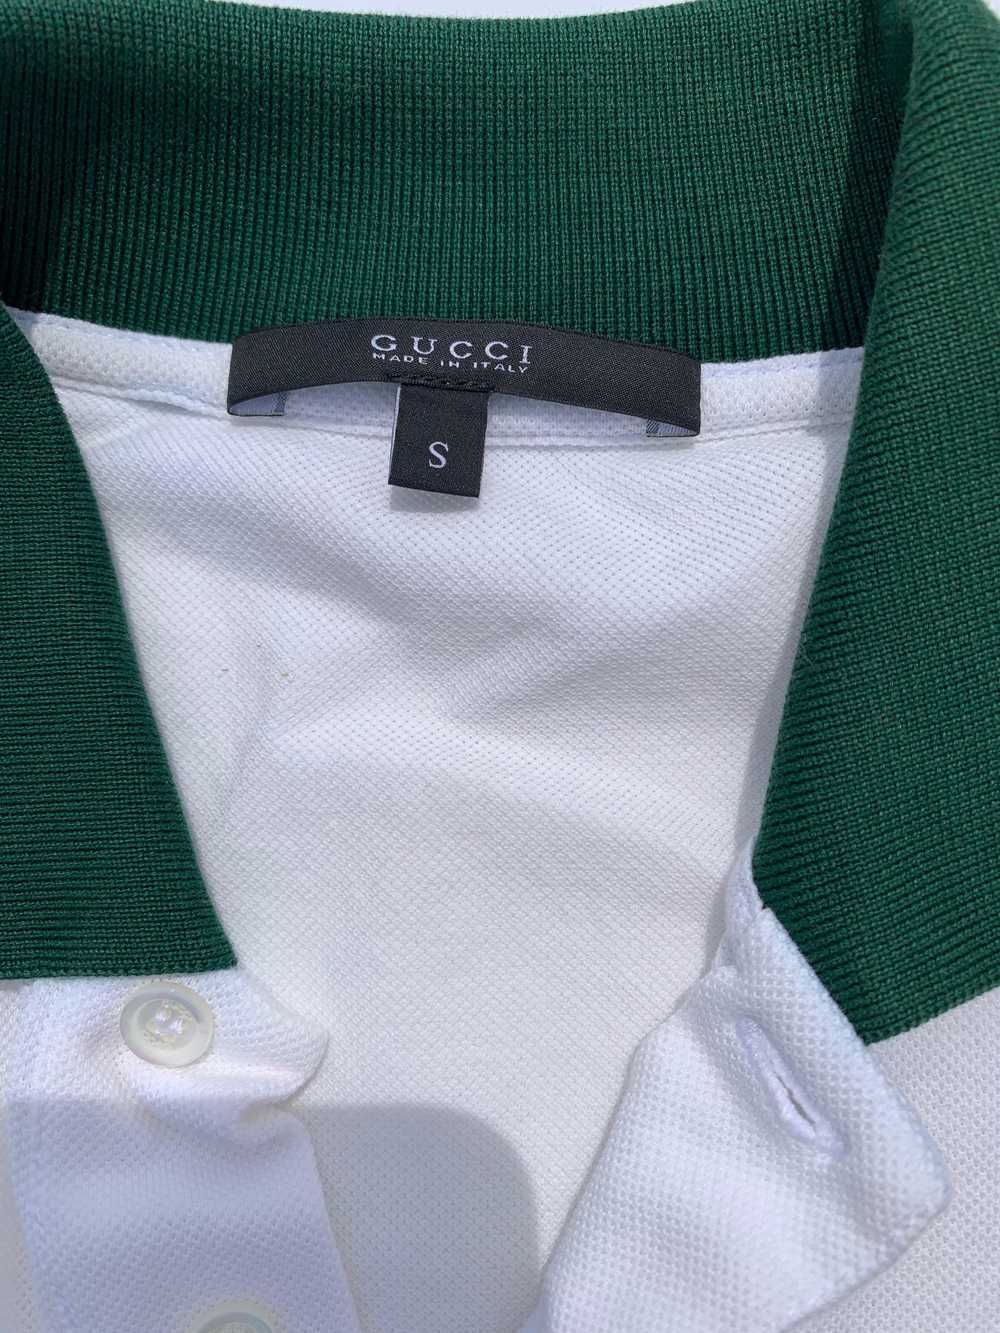 Gucci White Polo Shirt With Web Green/Red Collar - image 4